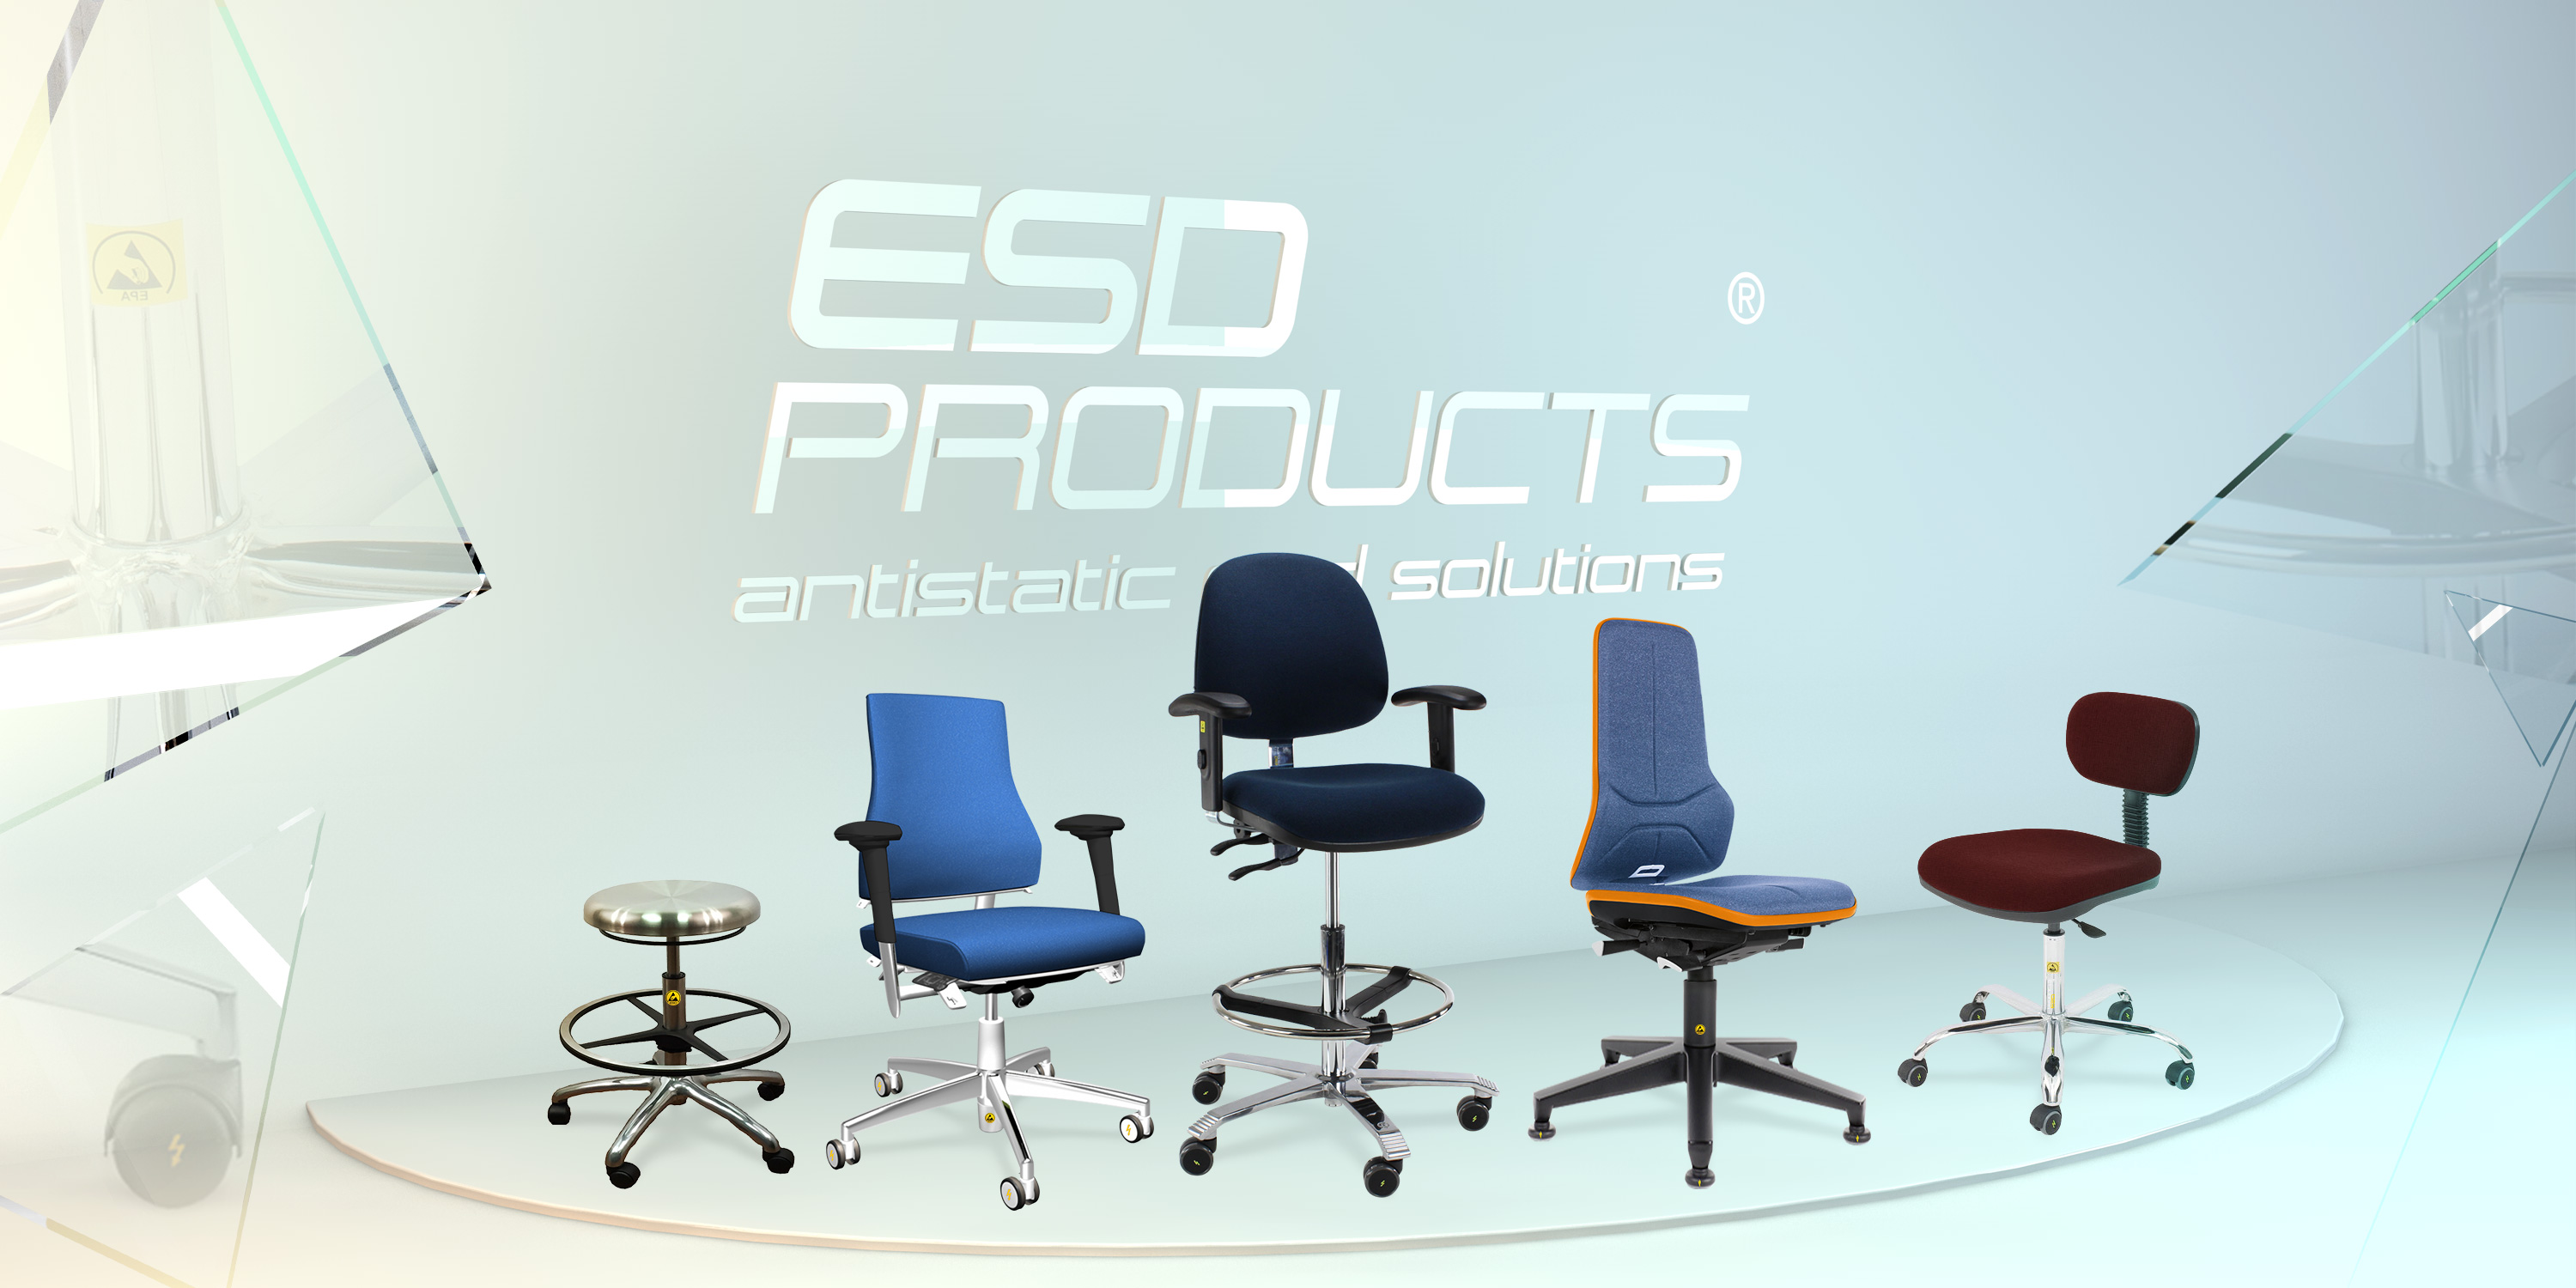 esd-chair-ESD-Chairs-anti-static-chairs-Static-Dissipative-Cleanroom-Chairs-seatings-ergonomic-chaise-antistatique-3000x1500